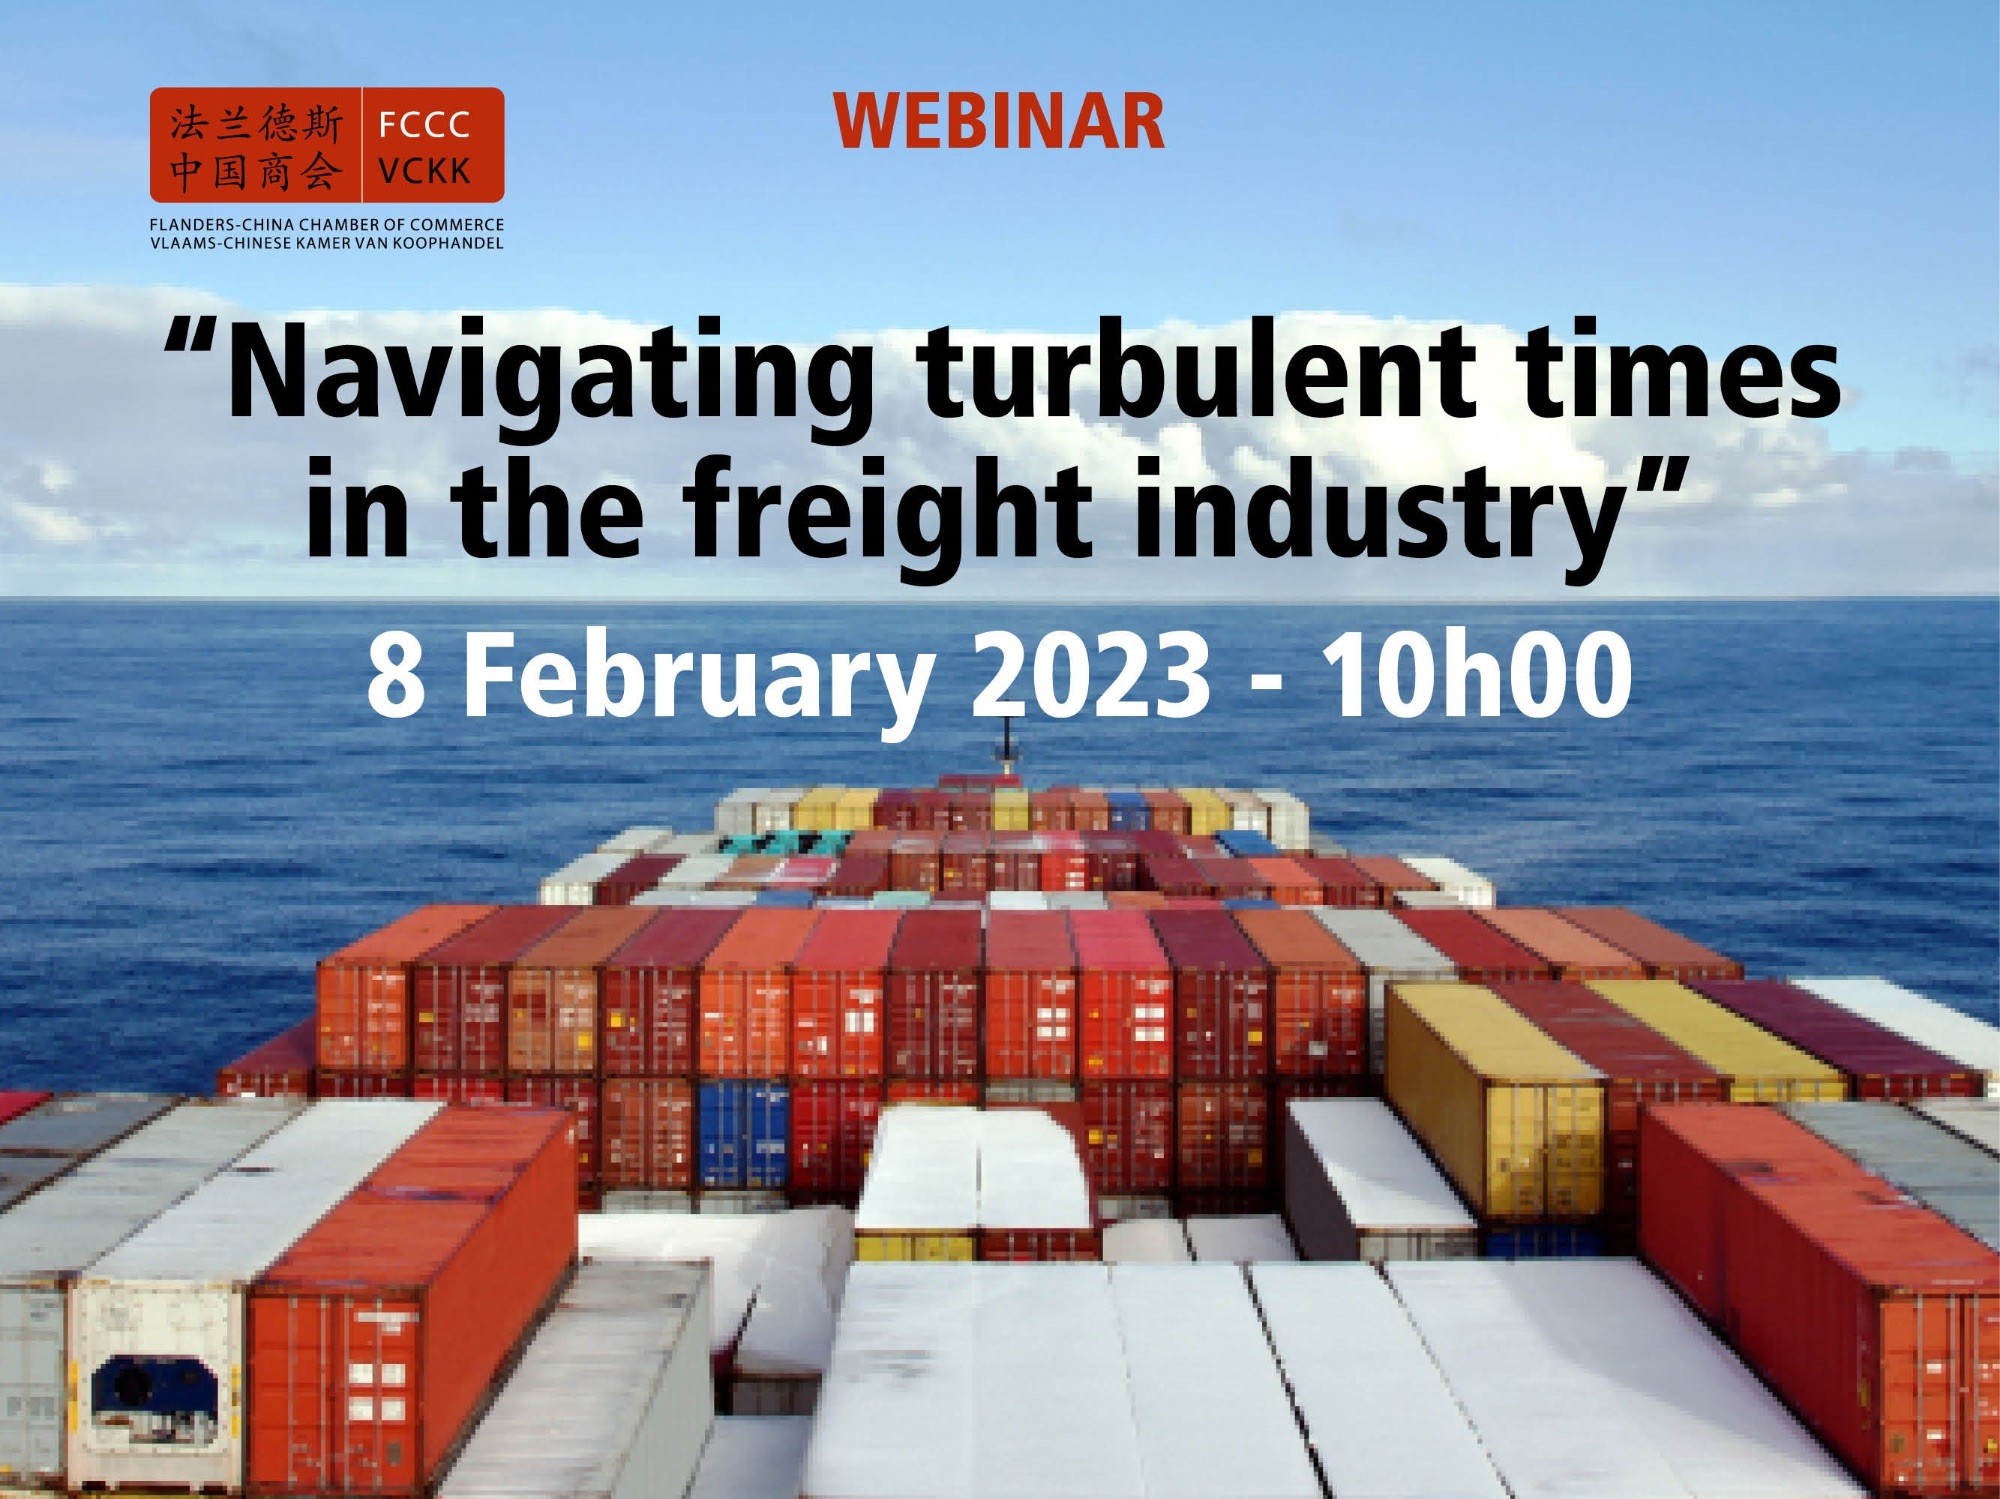 Webinar: “Navigating turbulent times in the freight industry” - 8 February 2023 – 10h00 CET